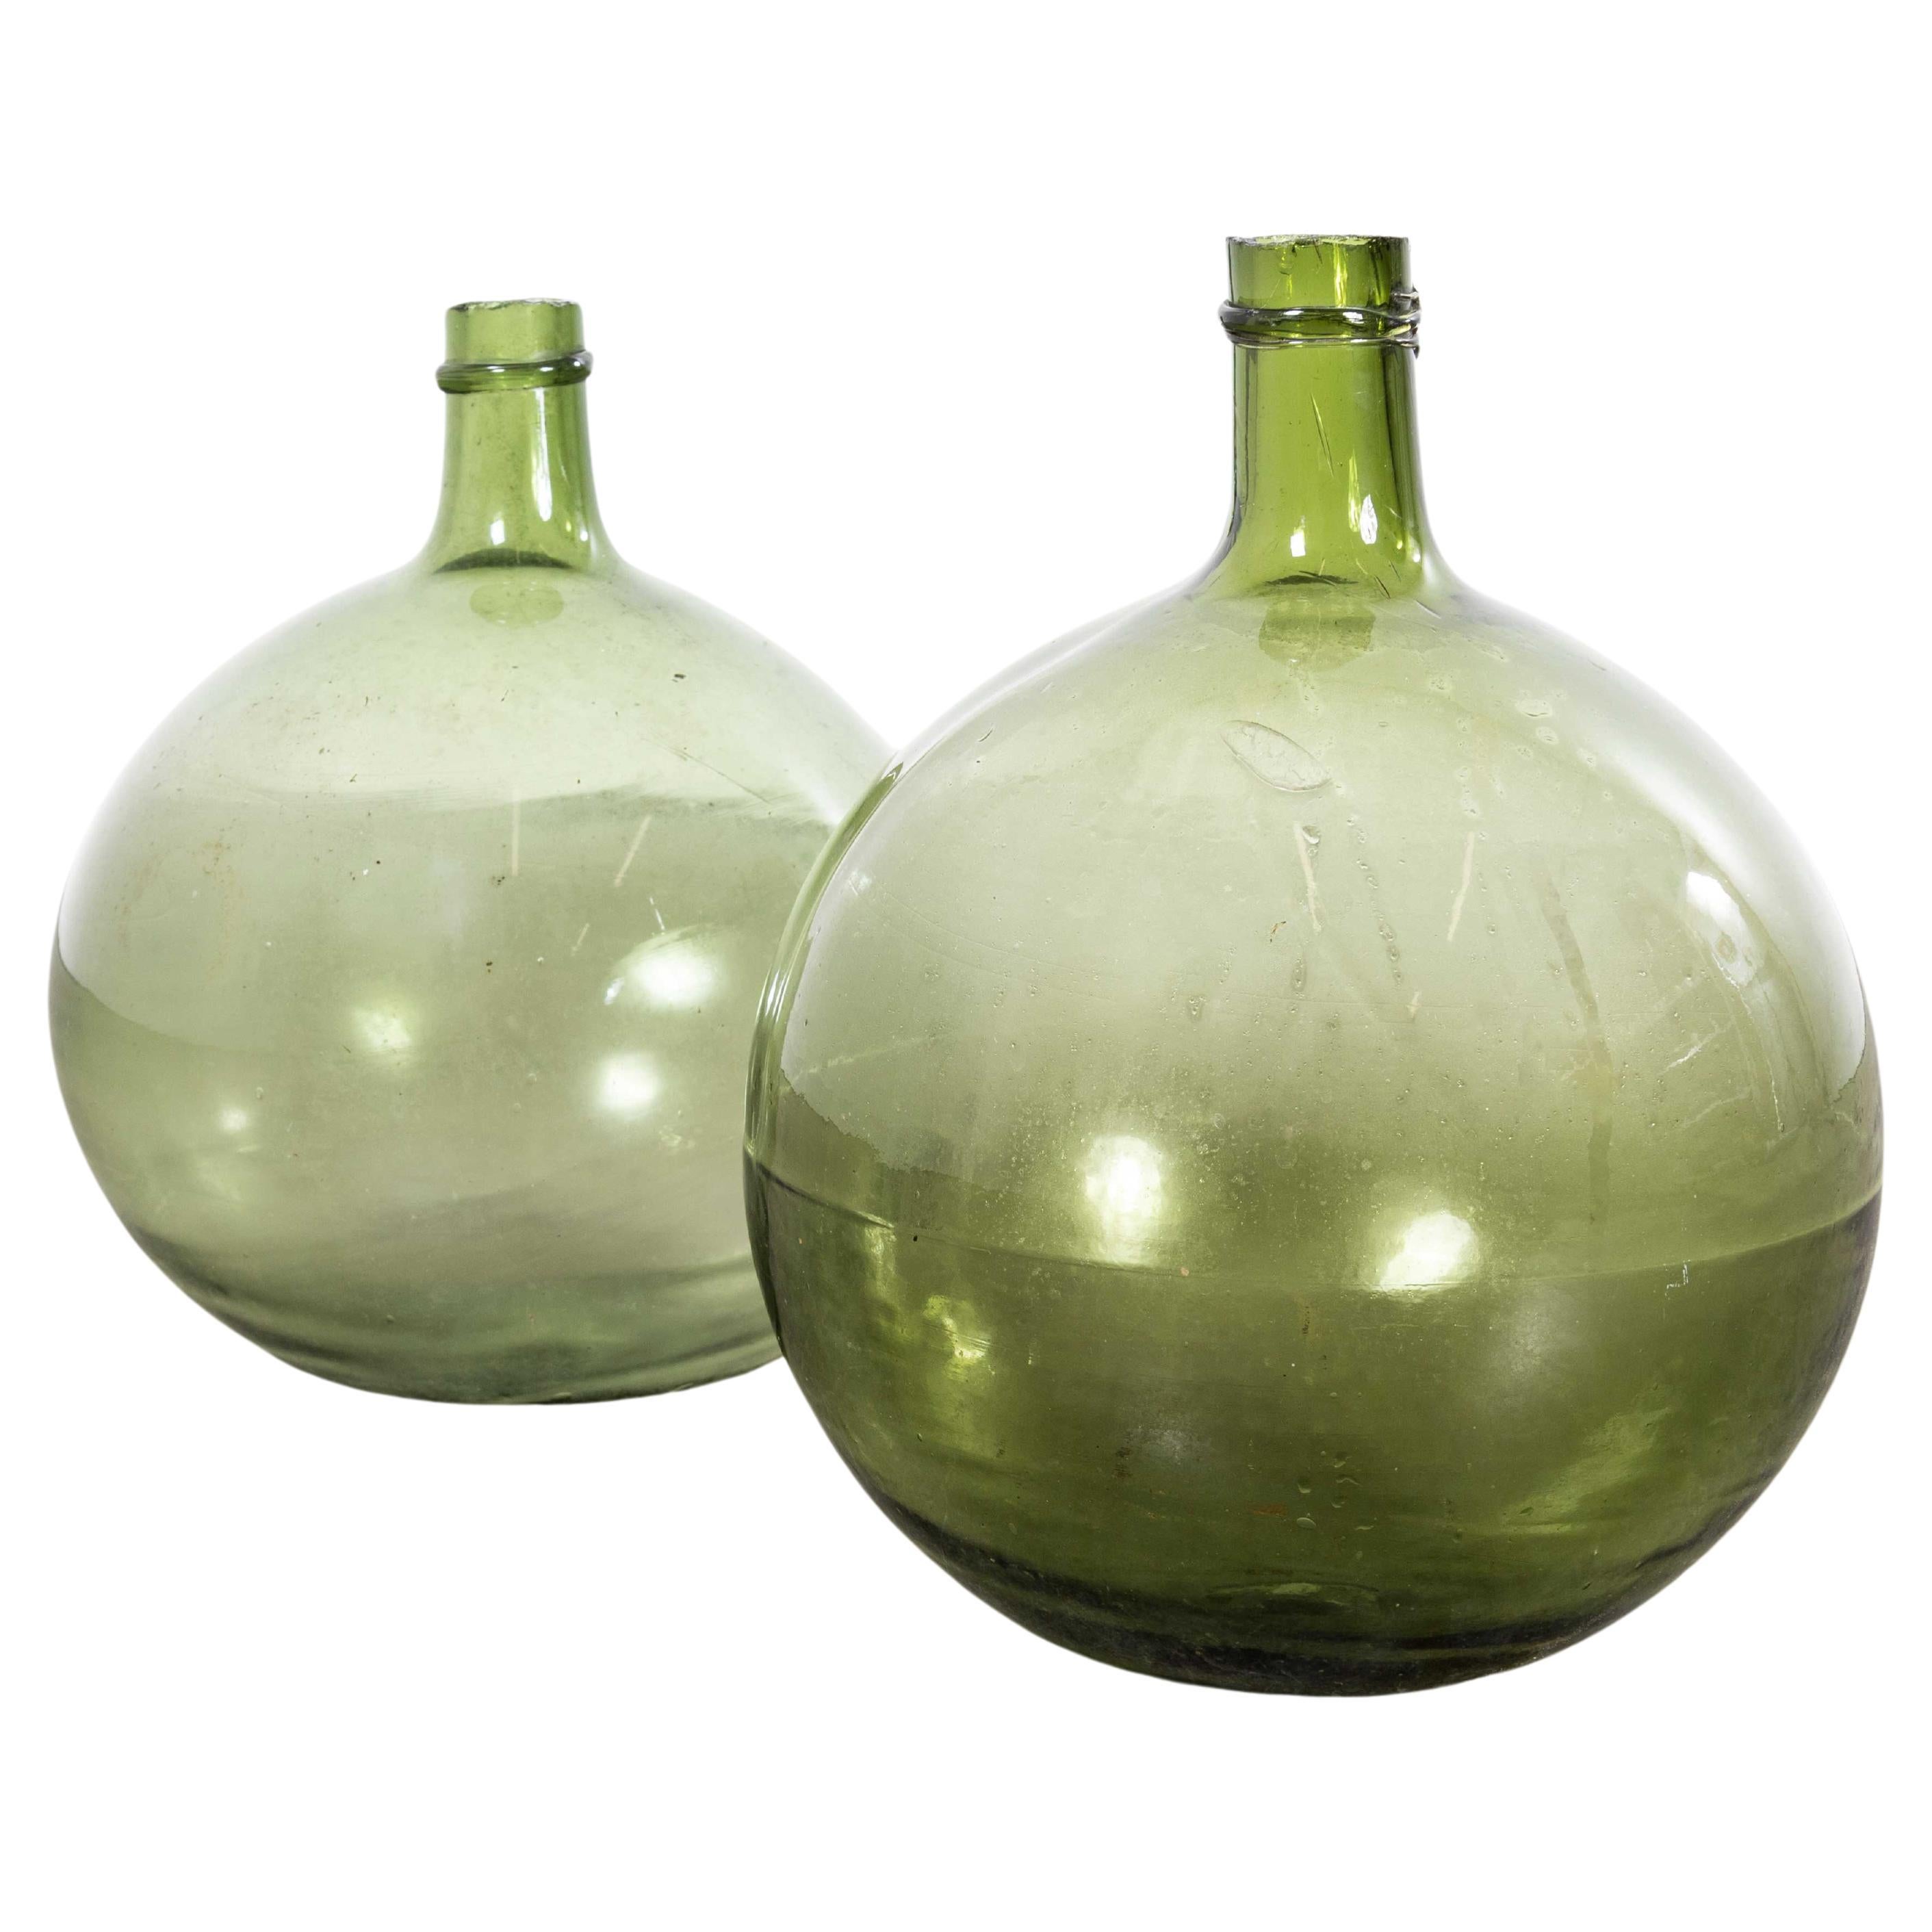 Vintage French Glass Demijohns - Pair (957.24)